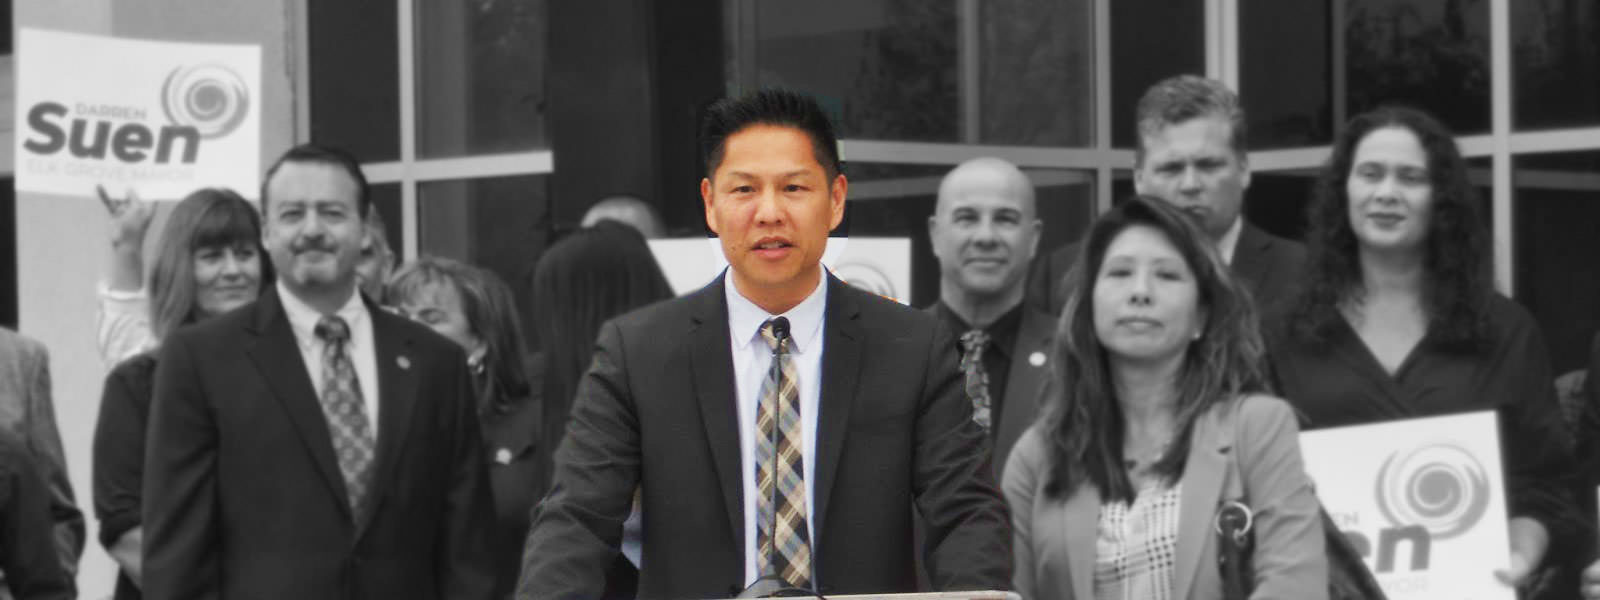 Region Business Offers ‘Enthusiastic’ Endorsement For Suen in 2018 Elk Grove Mayoral Race